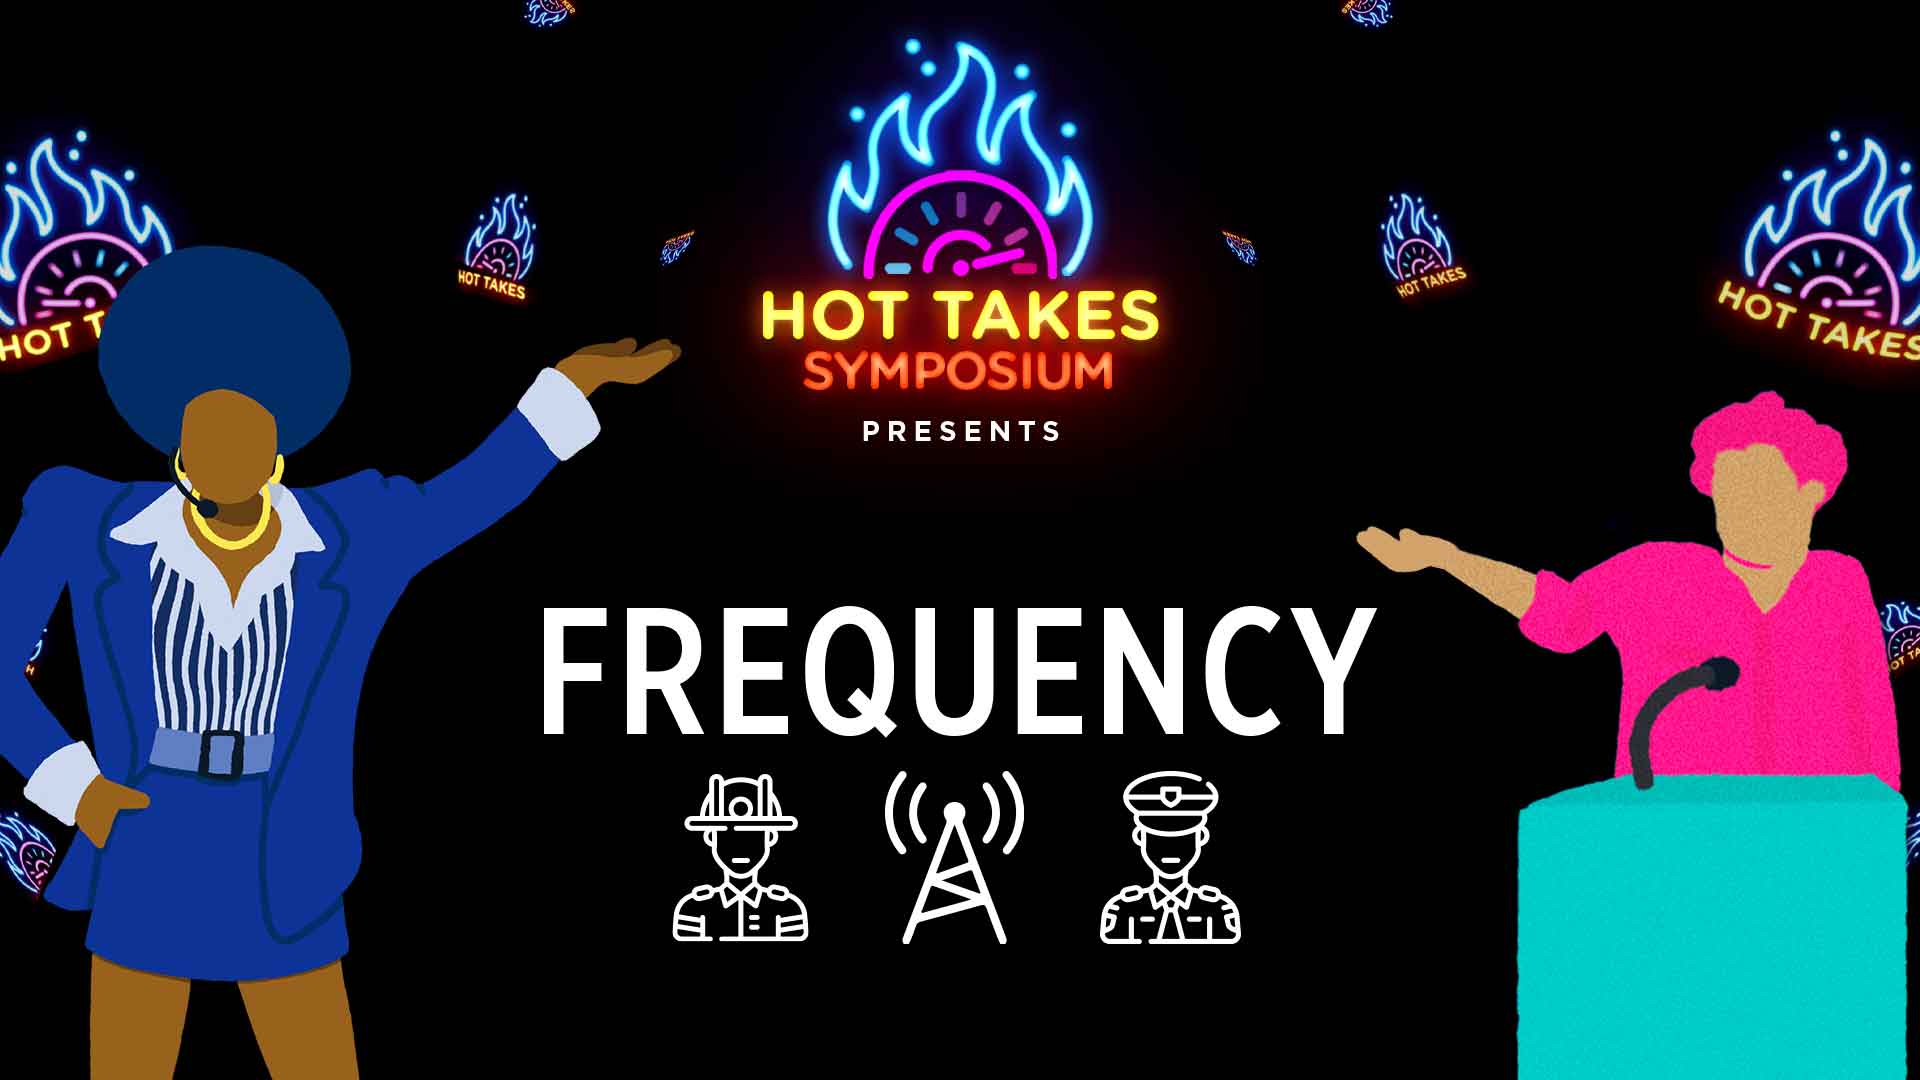 Hot Takes Symposium Frequency